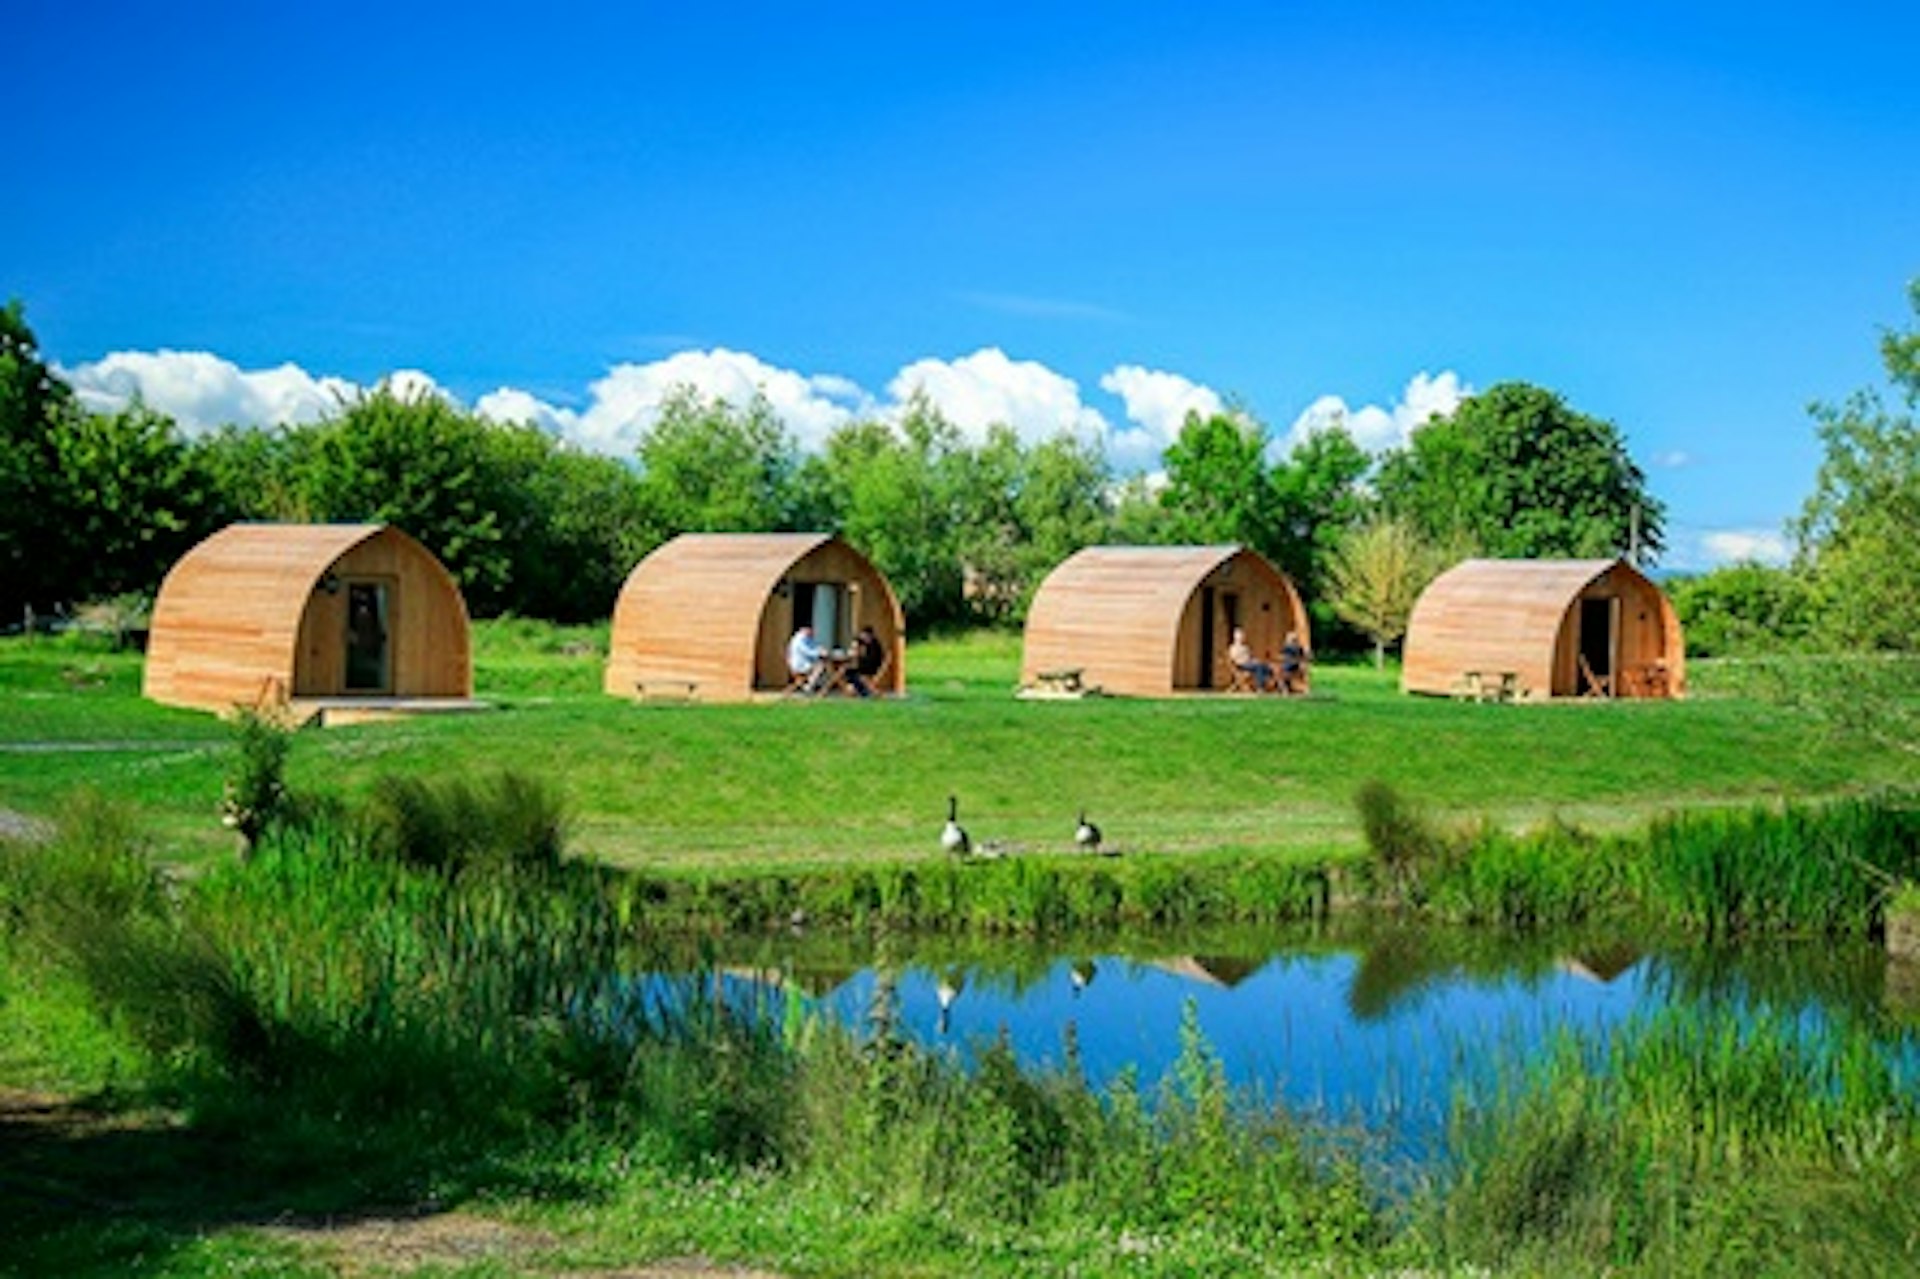 Two Night Adventure Glamping Escape with Axe Throwing or Archery for Four at Wall Eden Farm 2